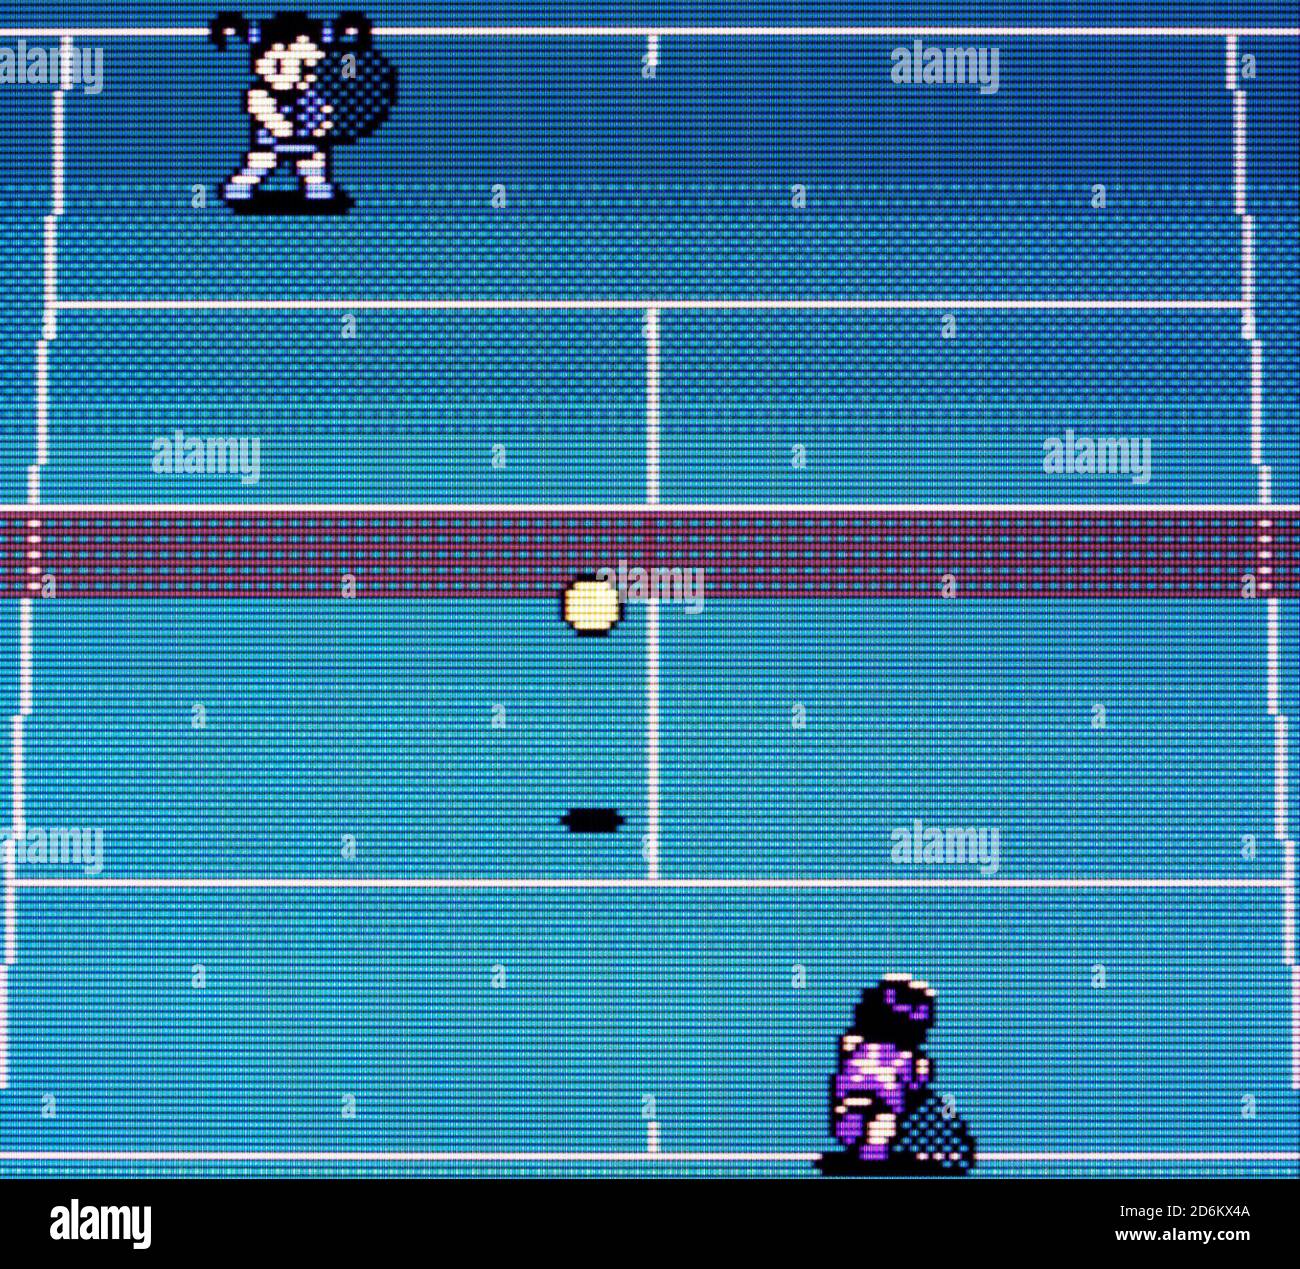 Pocket Tennis Color - Neo Geo Pocket Color Videogame - Editorial use only  Stock Photo - Alamy